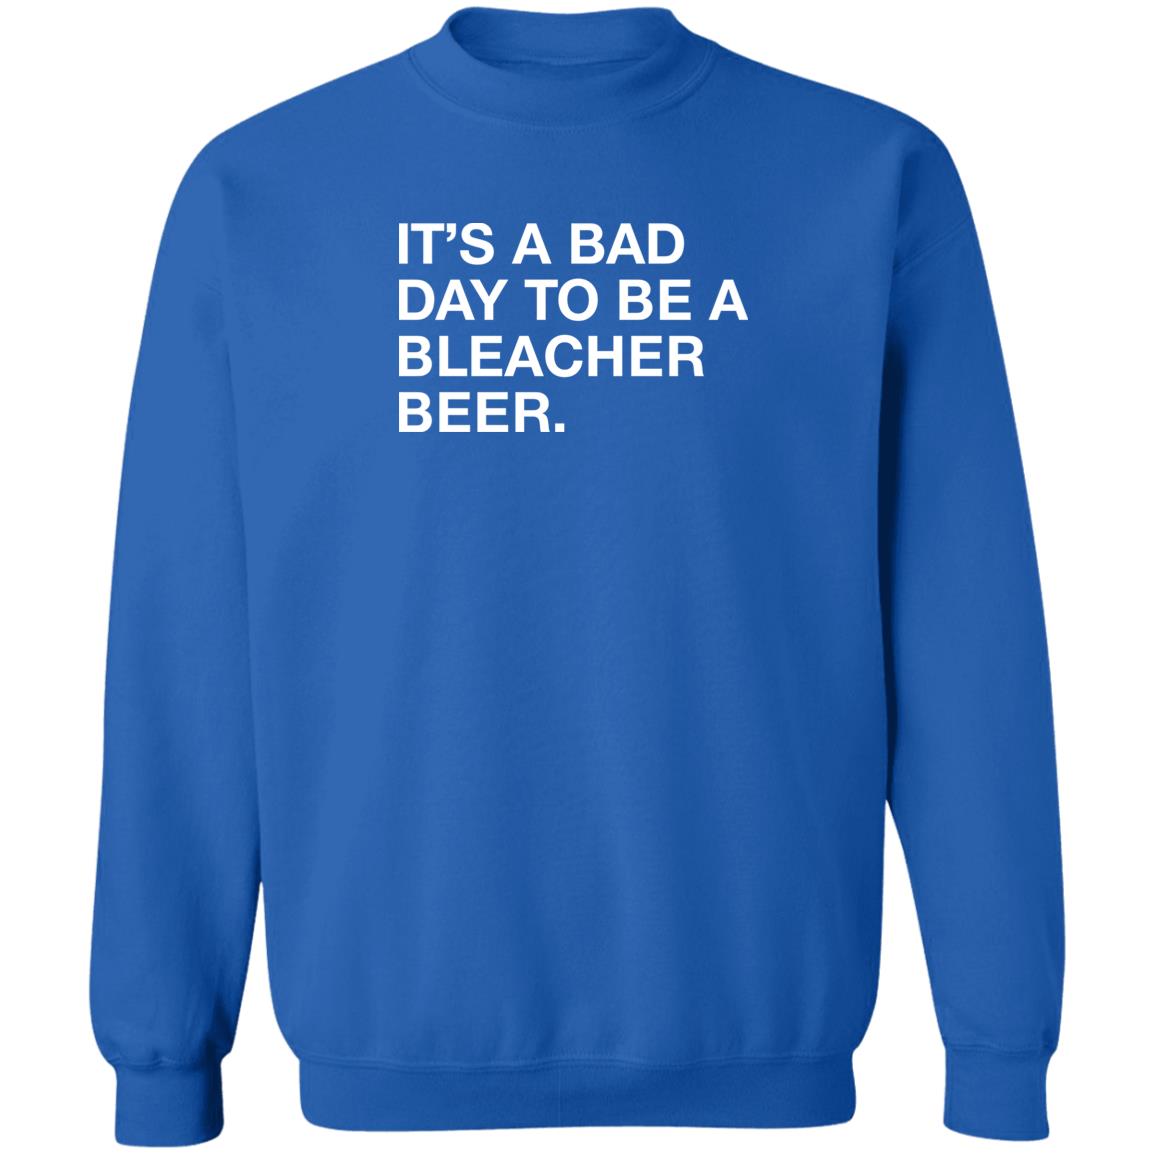 It’s A Bad Day To Be A Bleacher Beer Shirt Obvious Shirts